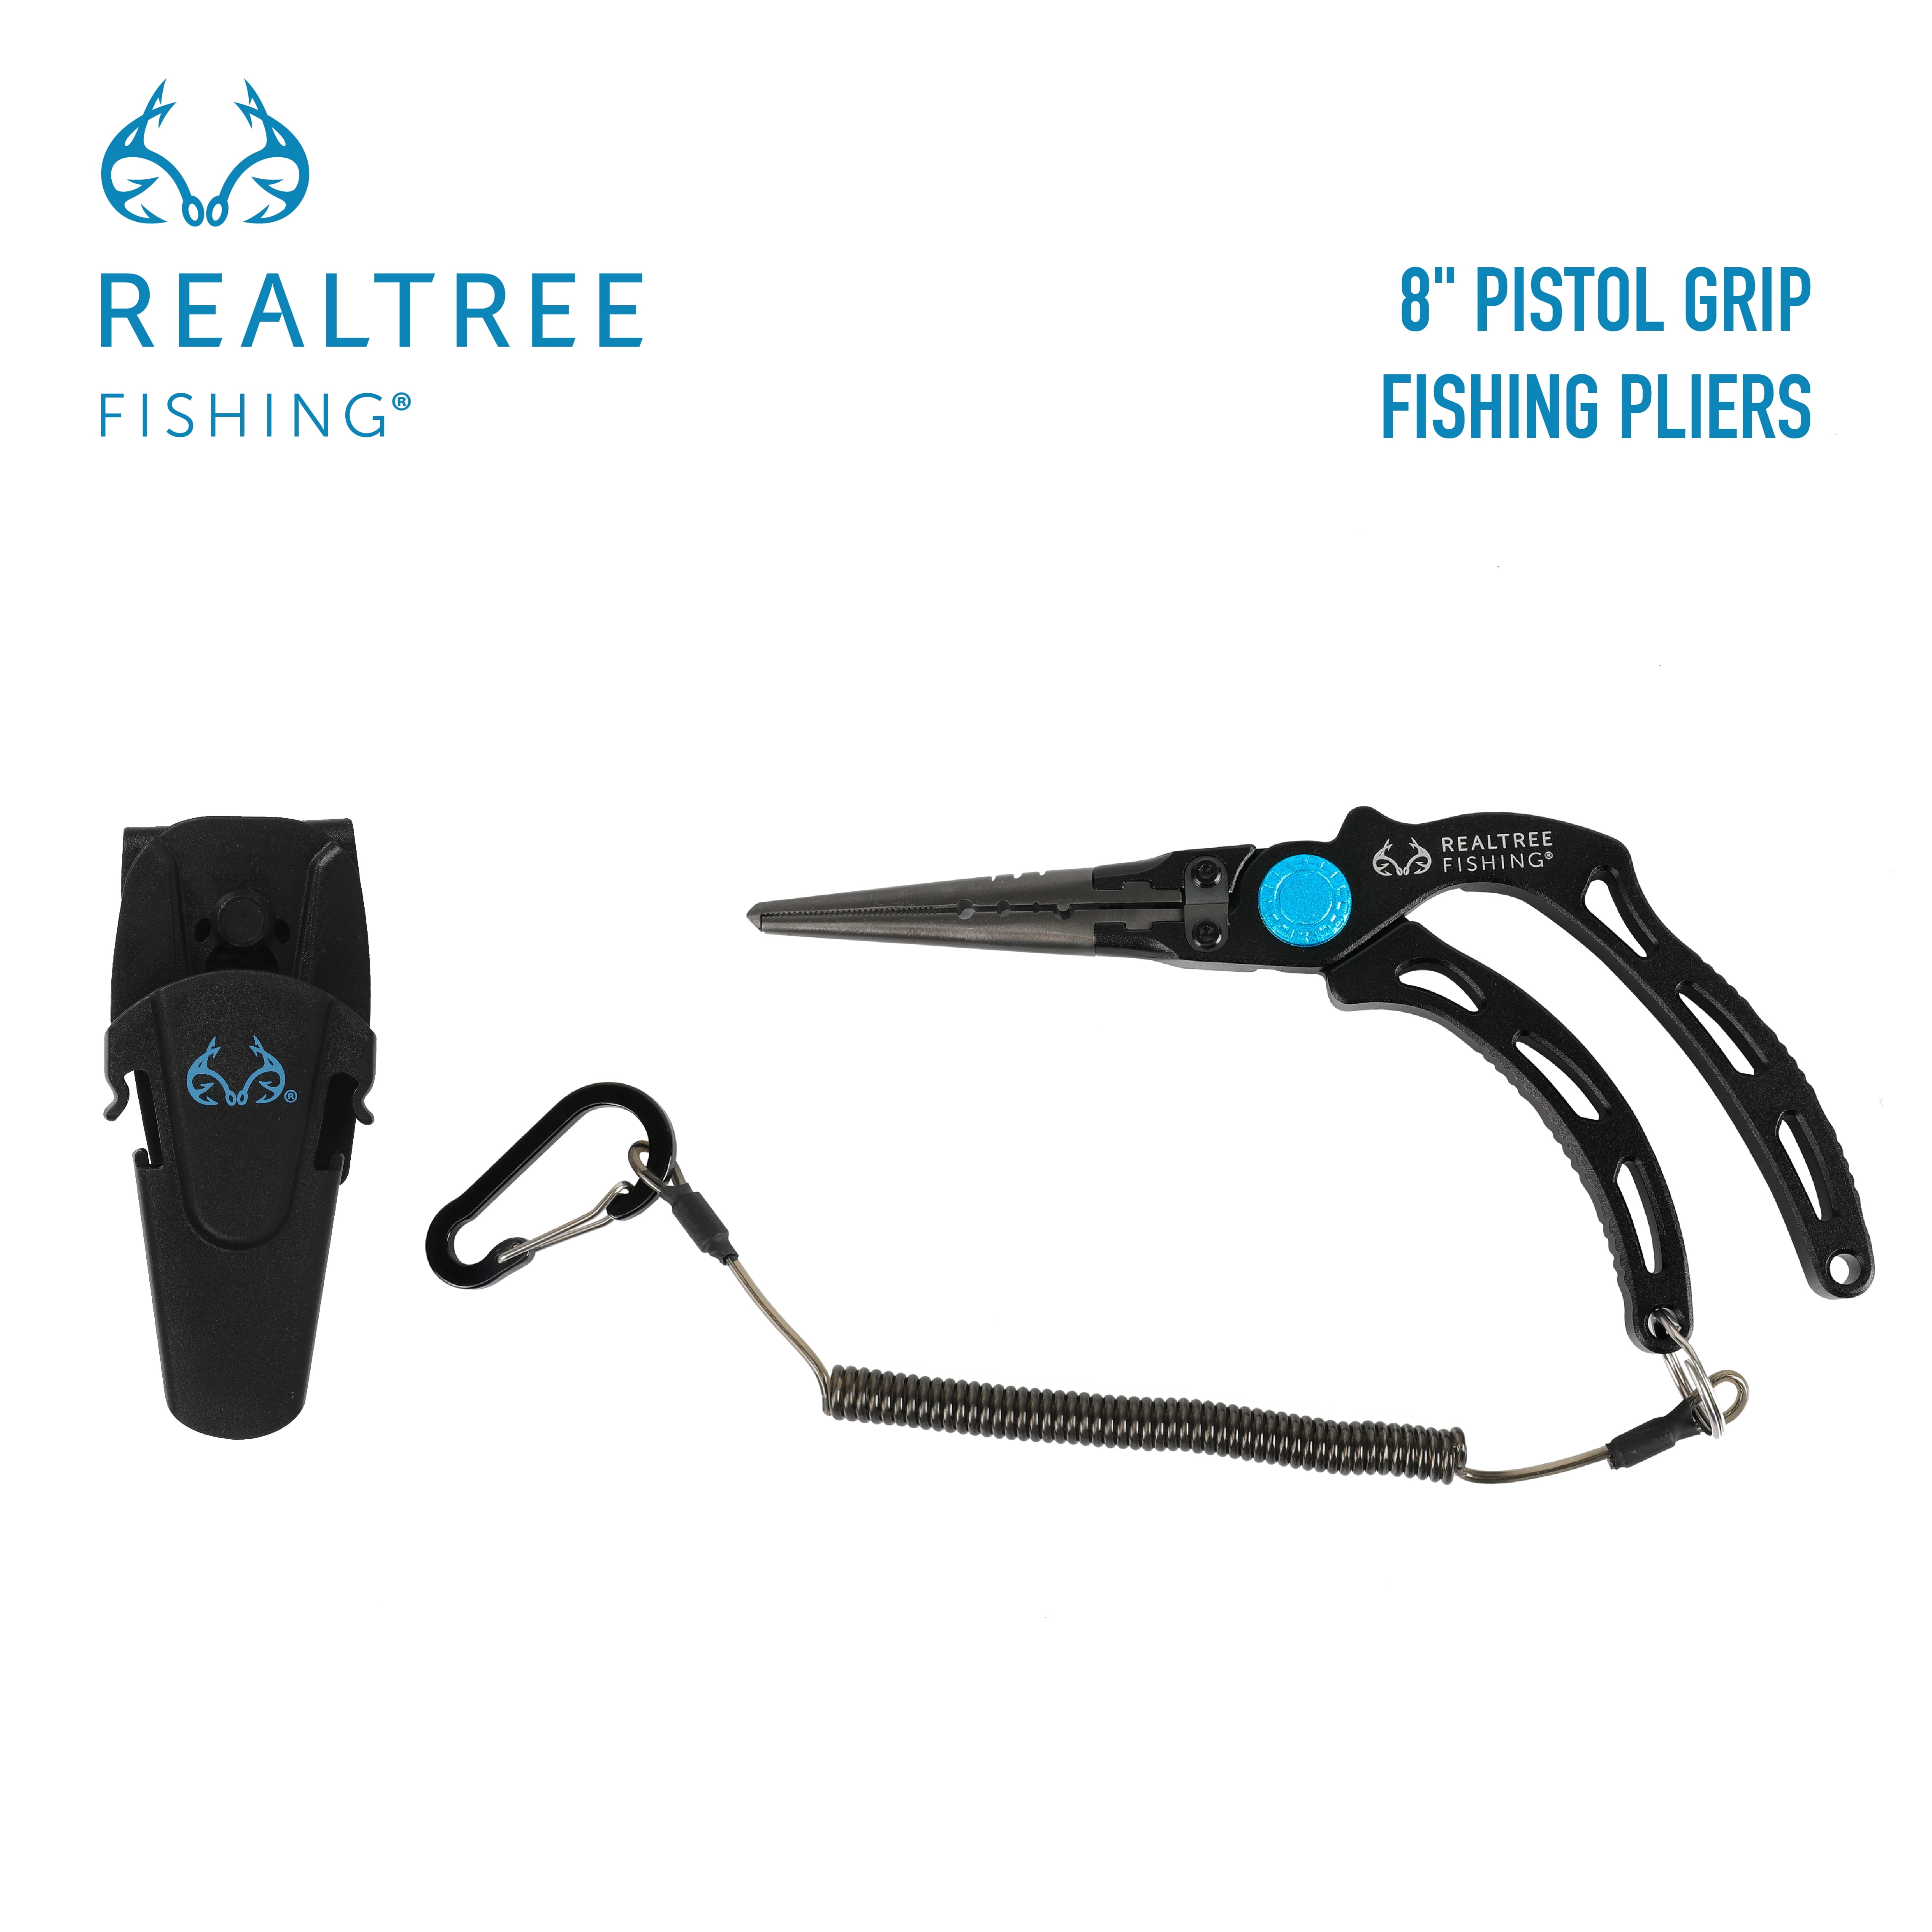 Spring loaded pliers with belt clip holster, fish gripper, 5 to 8